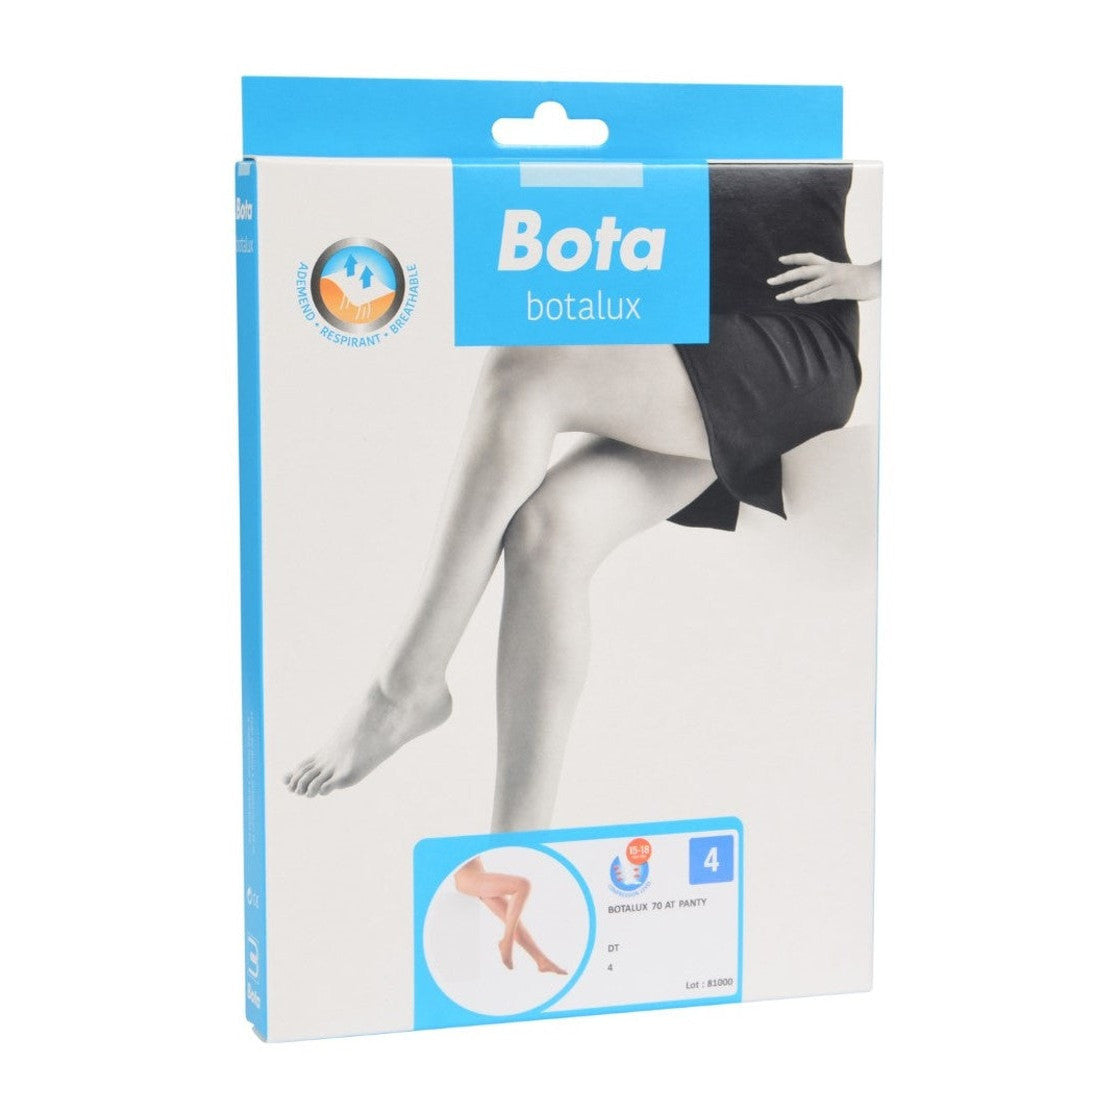 Botalux 70 support tights at dark